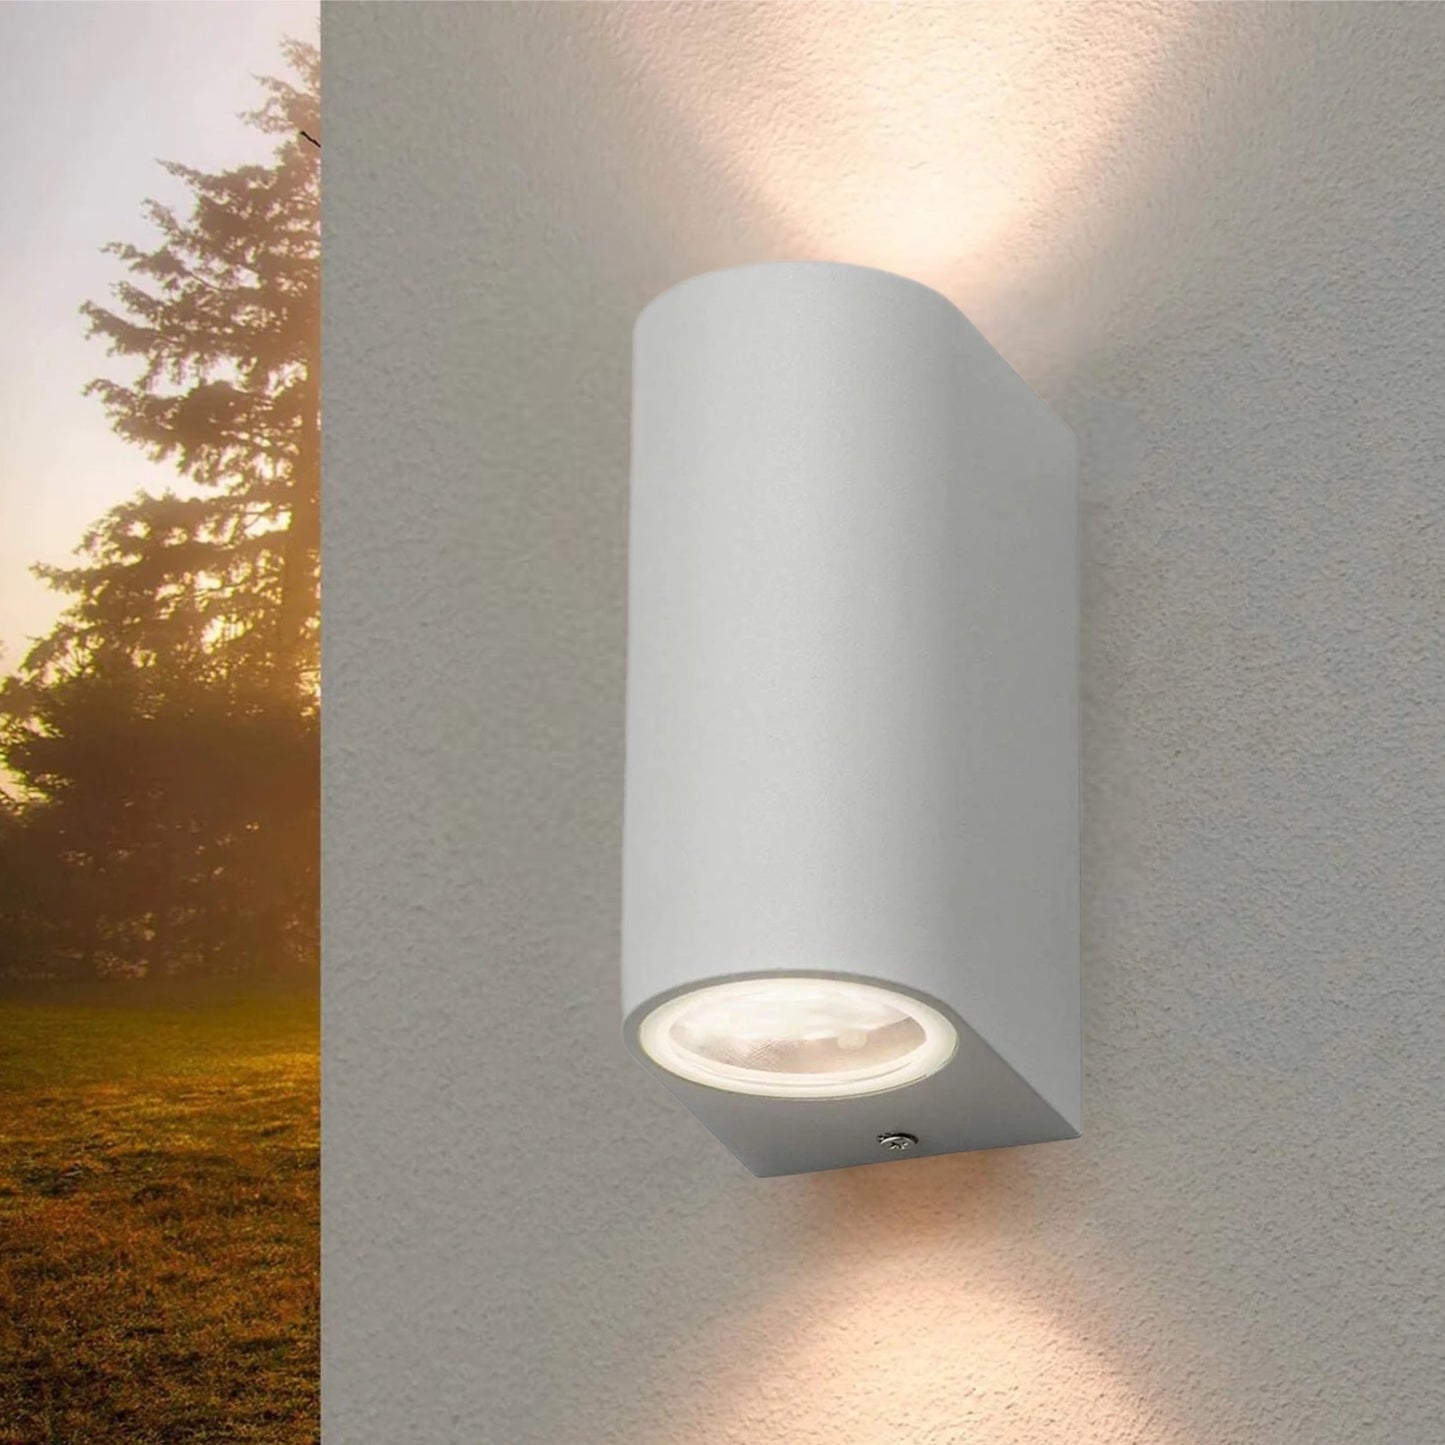 Our Tiago would look perfect in a modern or more traditional home design. Outdoor sconces can provide ambient light in your garden, at your front door or on your terrace, as well as a great security solution. It is designed for durability and longevity with its robust material producing a fully weather and waterproof lighting fixture. 